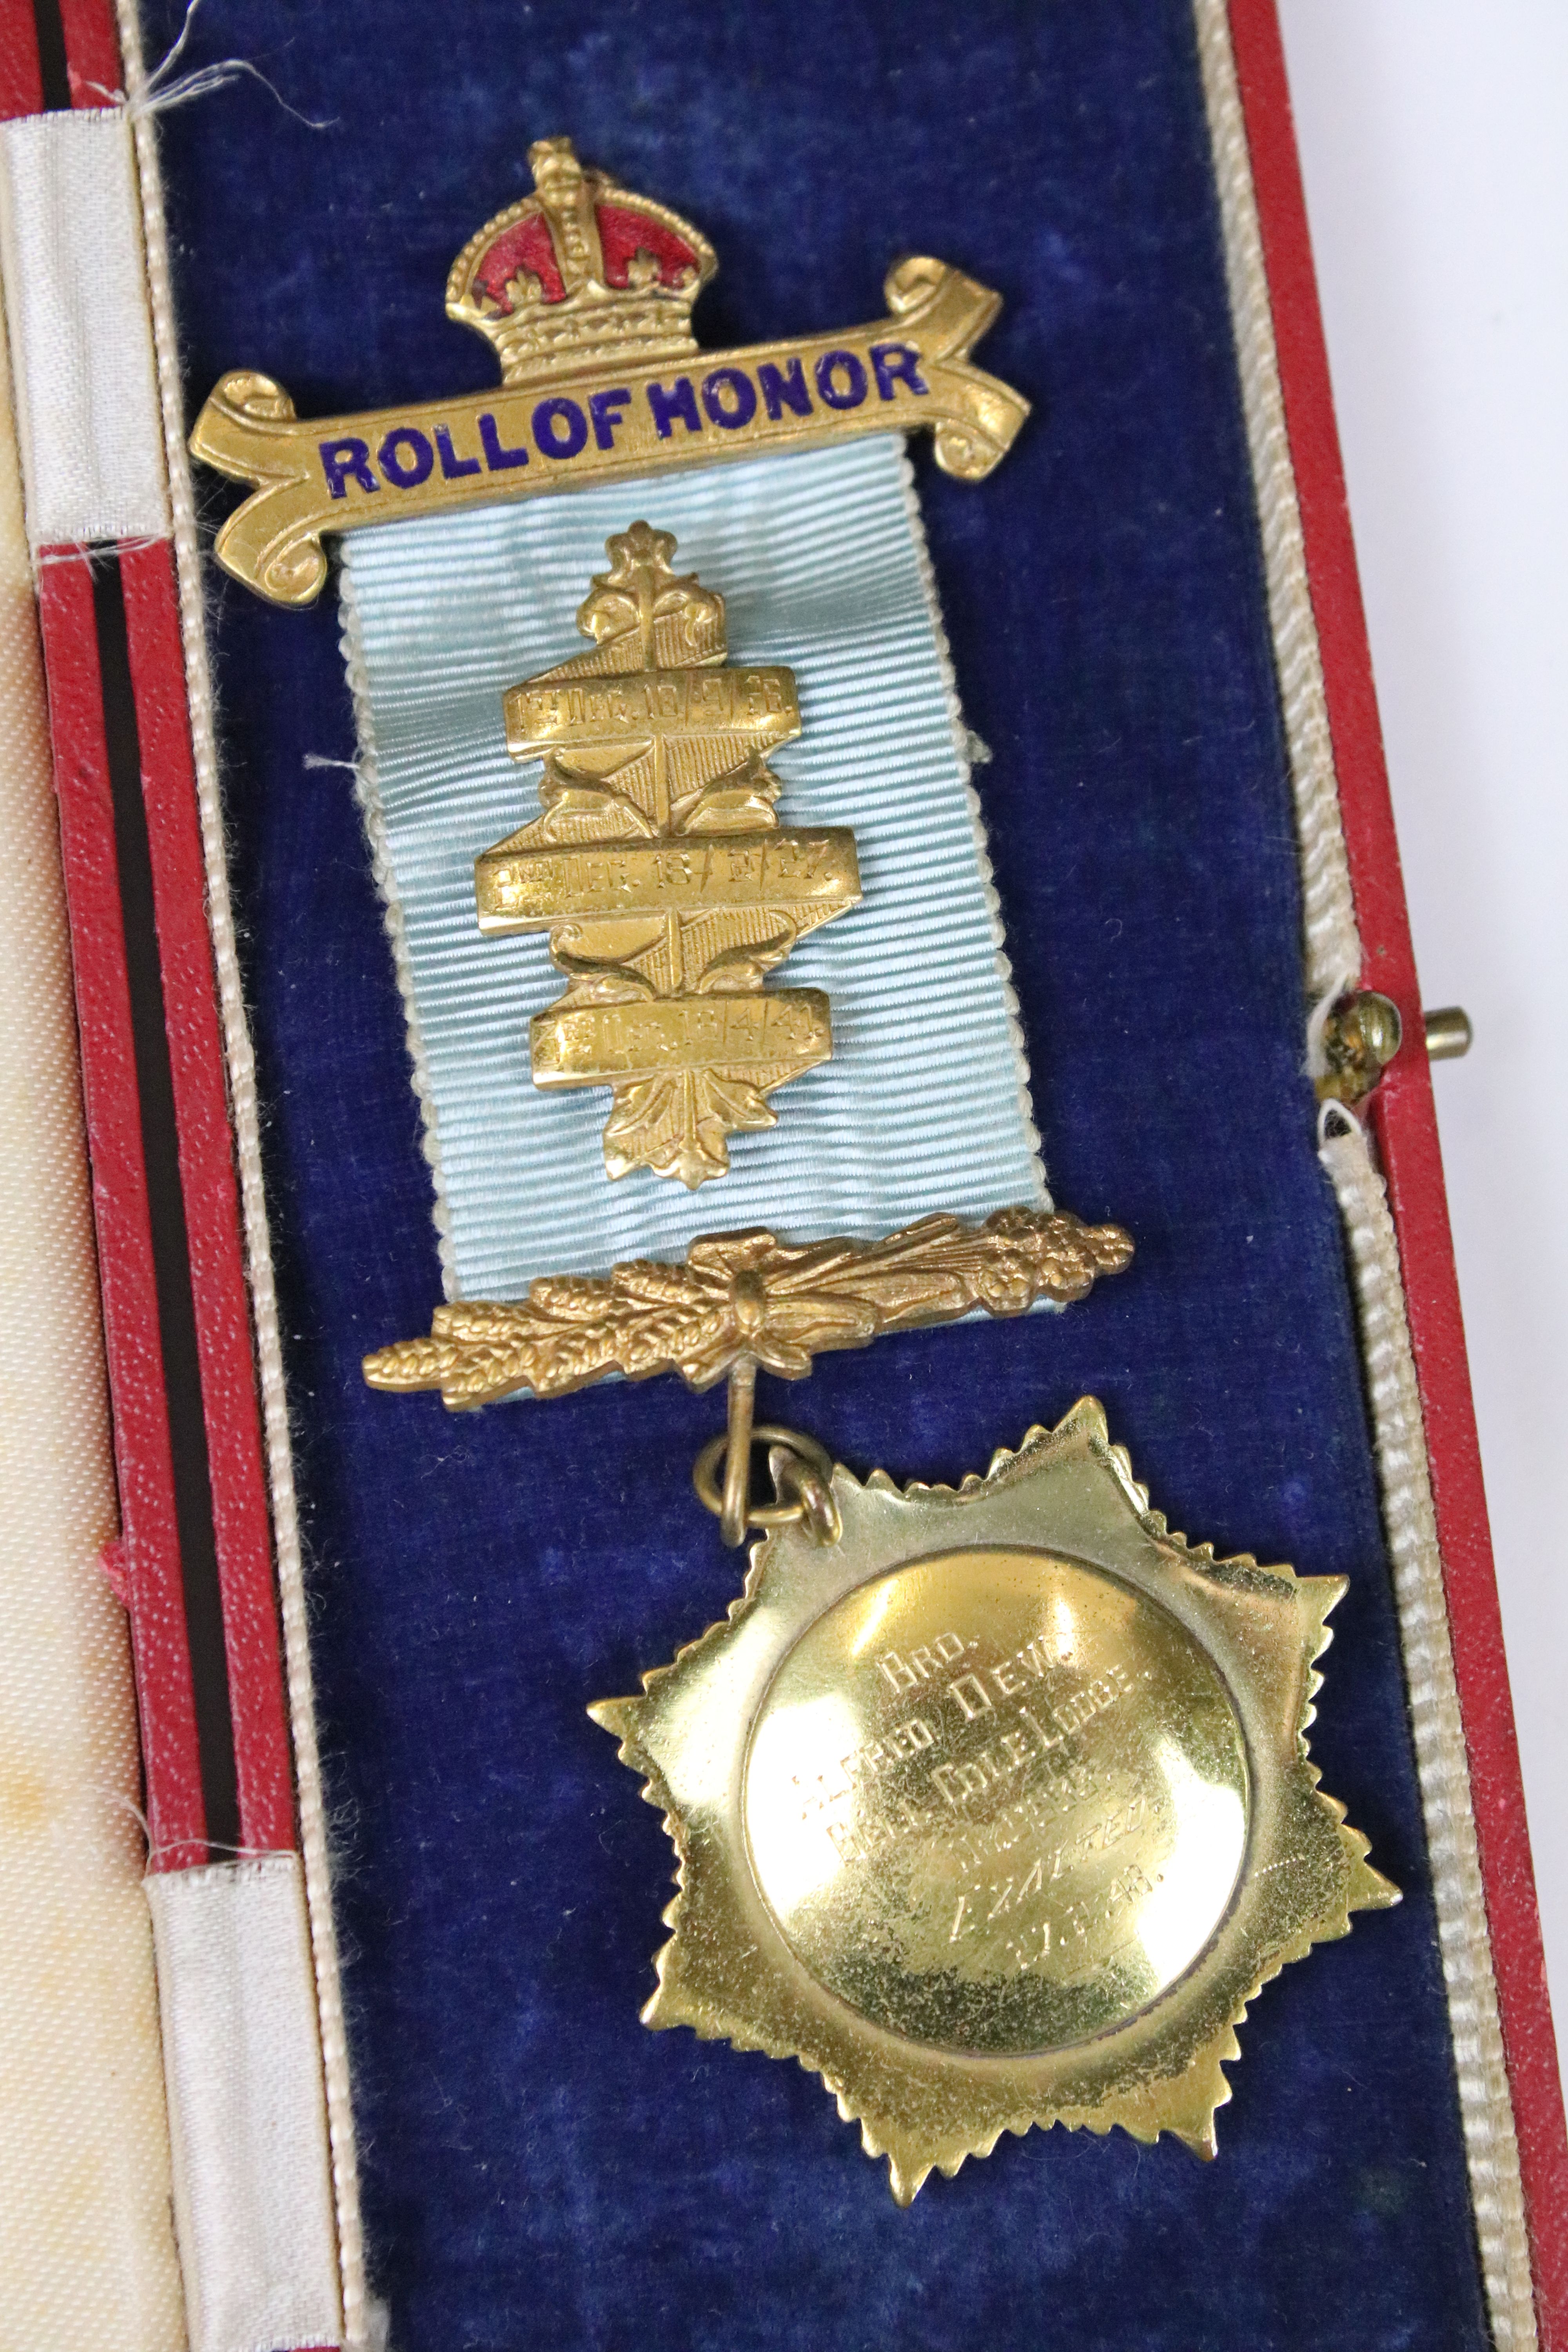 A selection of R.A.O.B. medals / jewels to include silver example together with a full size M.B.E. - Image 6 of 6